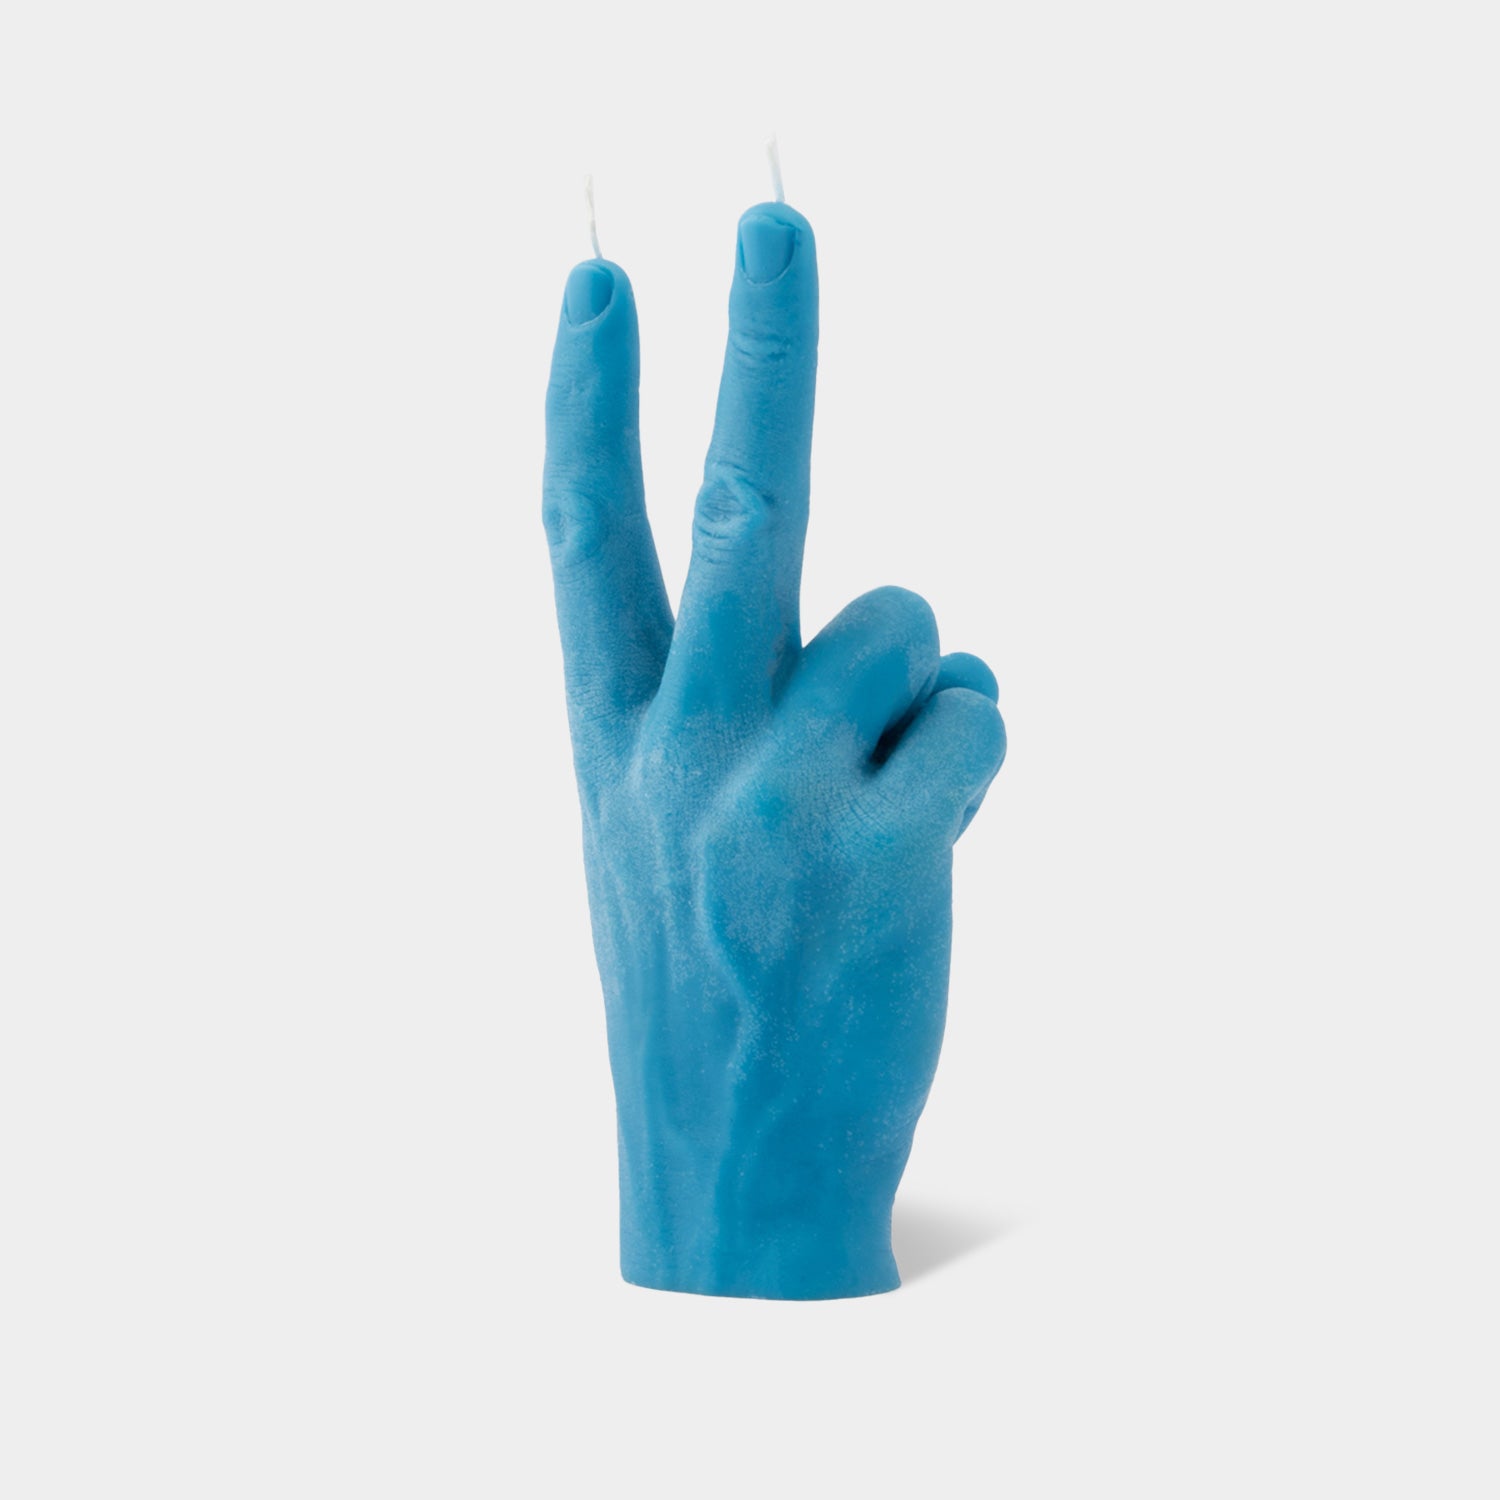 CandleHand "Peace" Candle - Blue